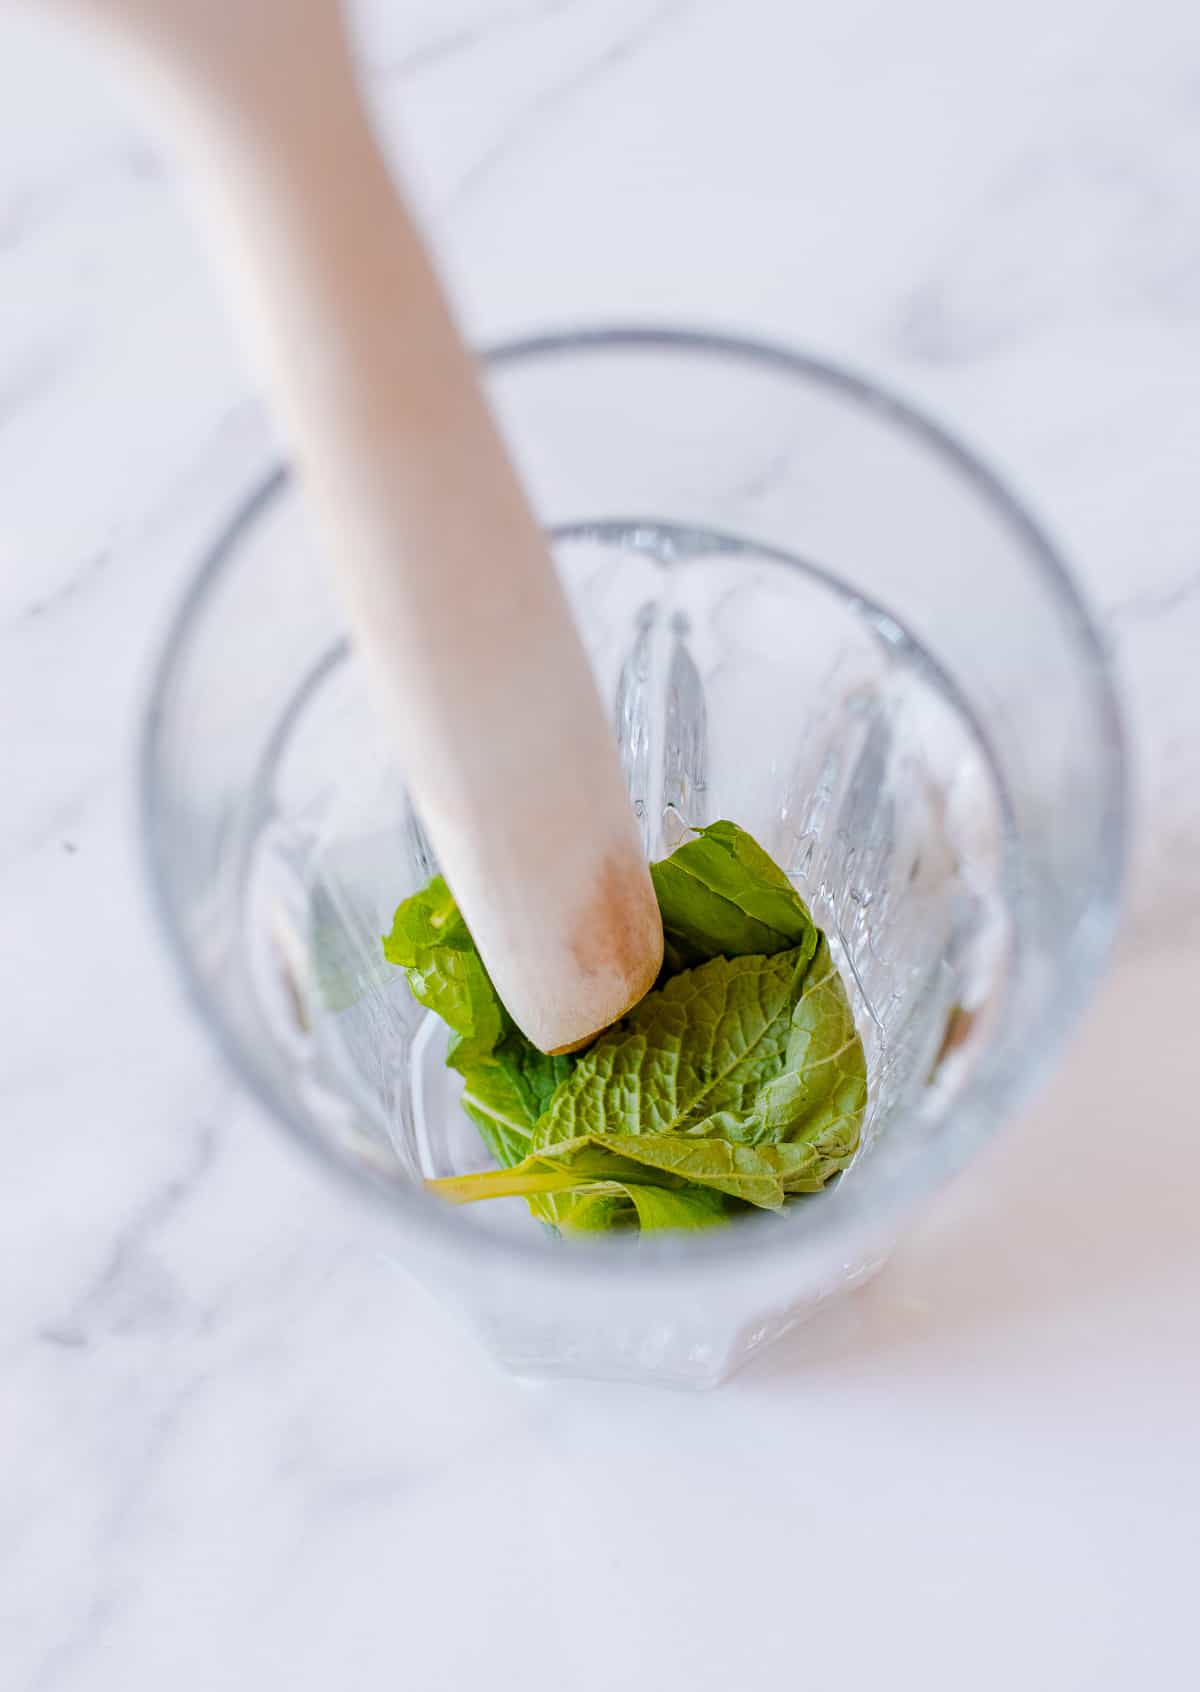 Mint leaves being muddled in a glass with a wooden spoon.